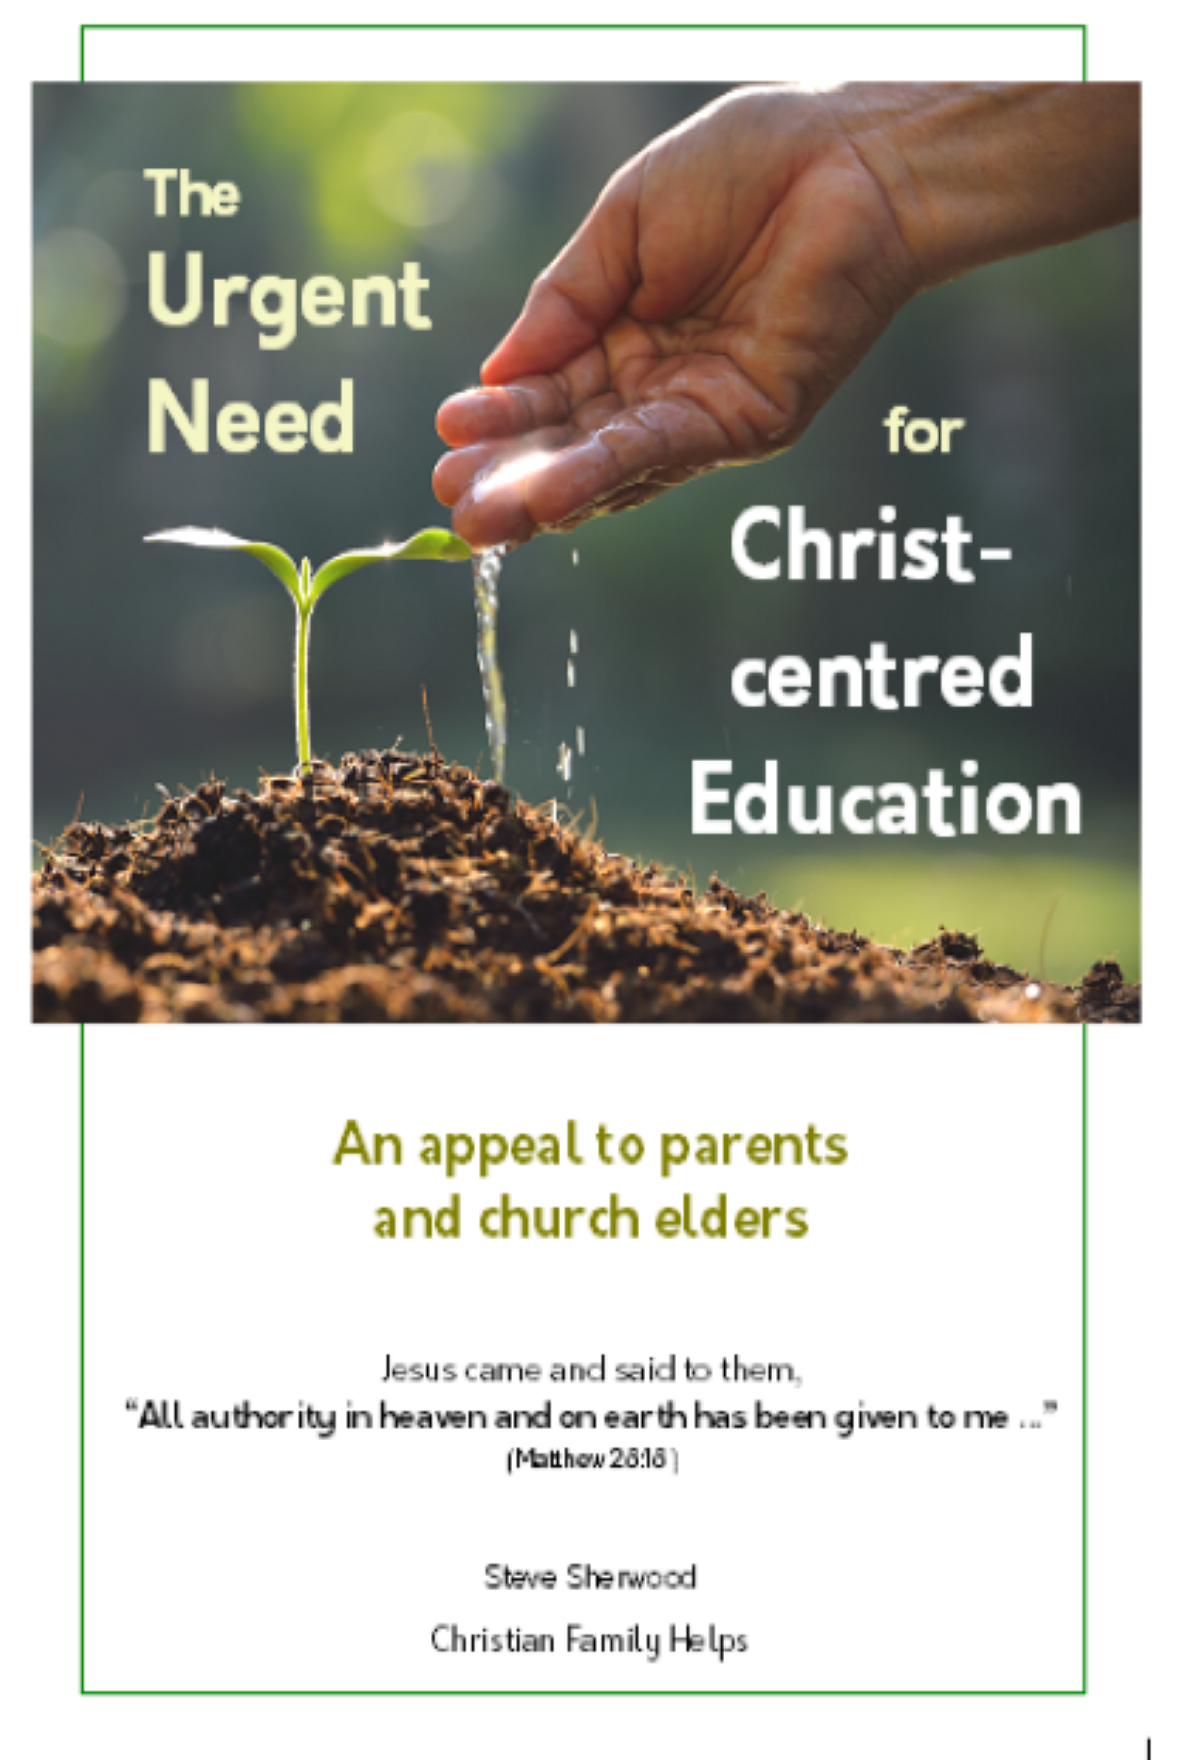 The Urgent Need for Christ-centred Education